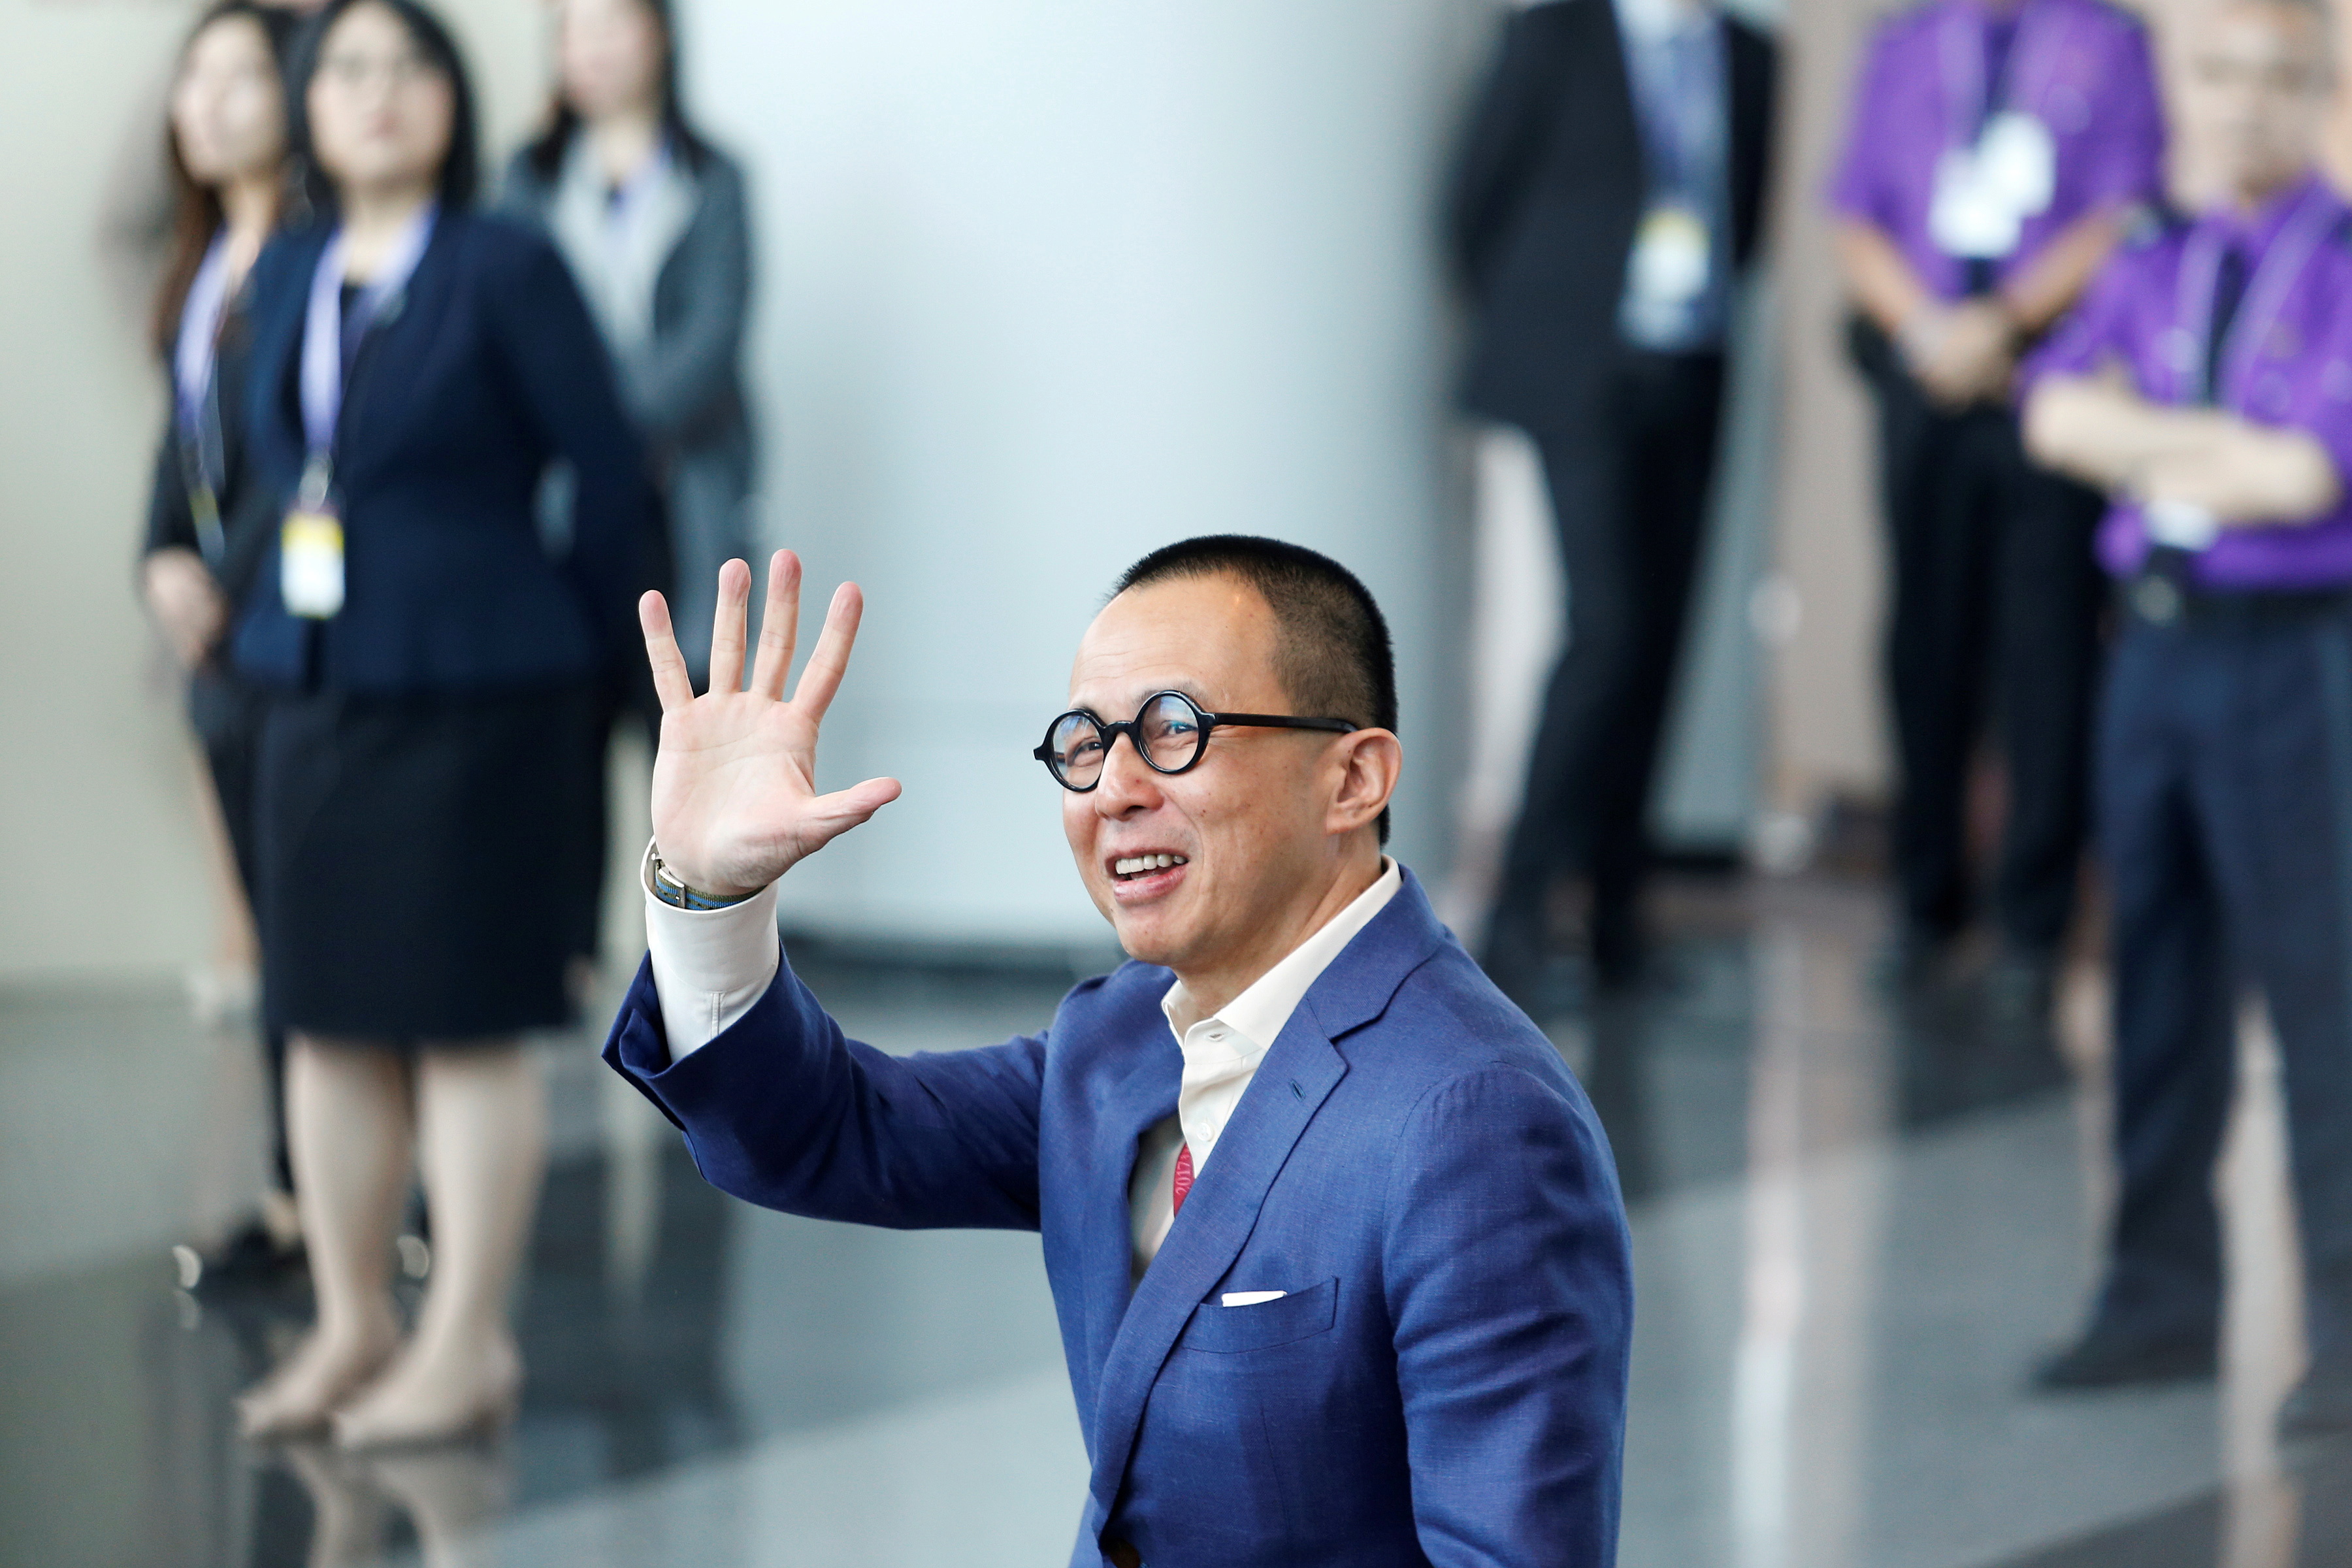 Richard Li, Hong Kong businessman and younger son of tycoon Li Ka-shing, waves as he arrives to vote during the election for Hong Kong's next Chief Executive in Hong Kong